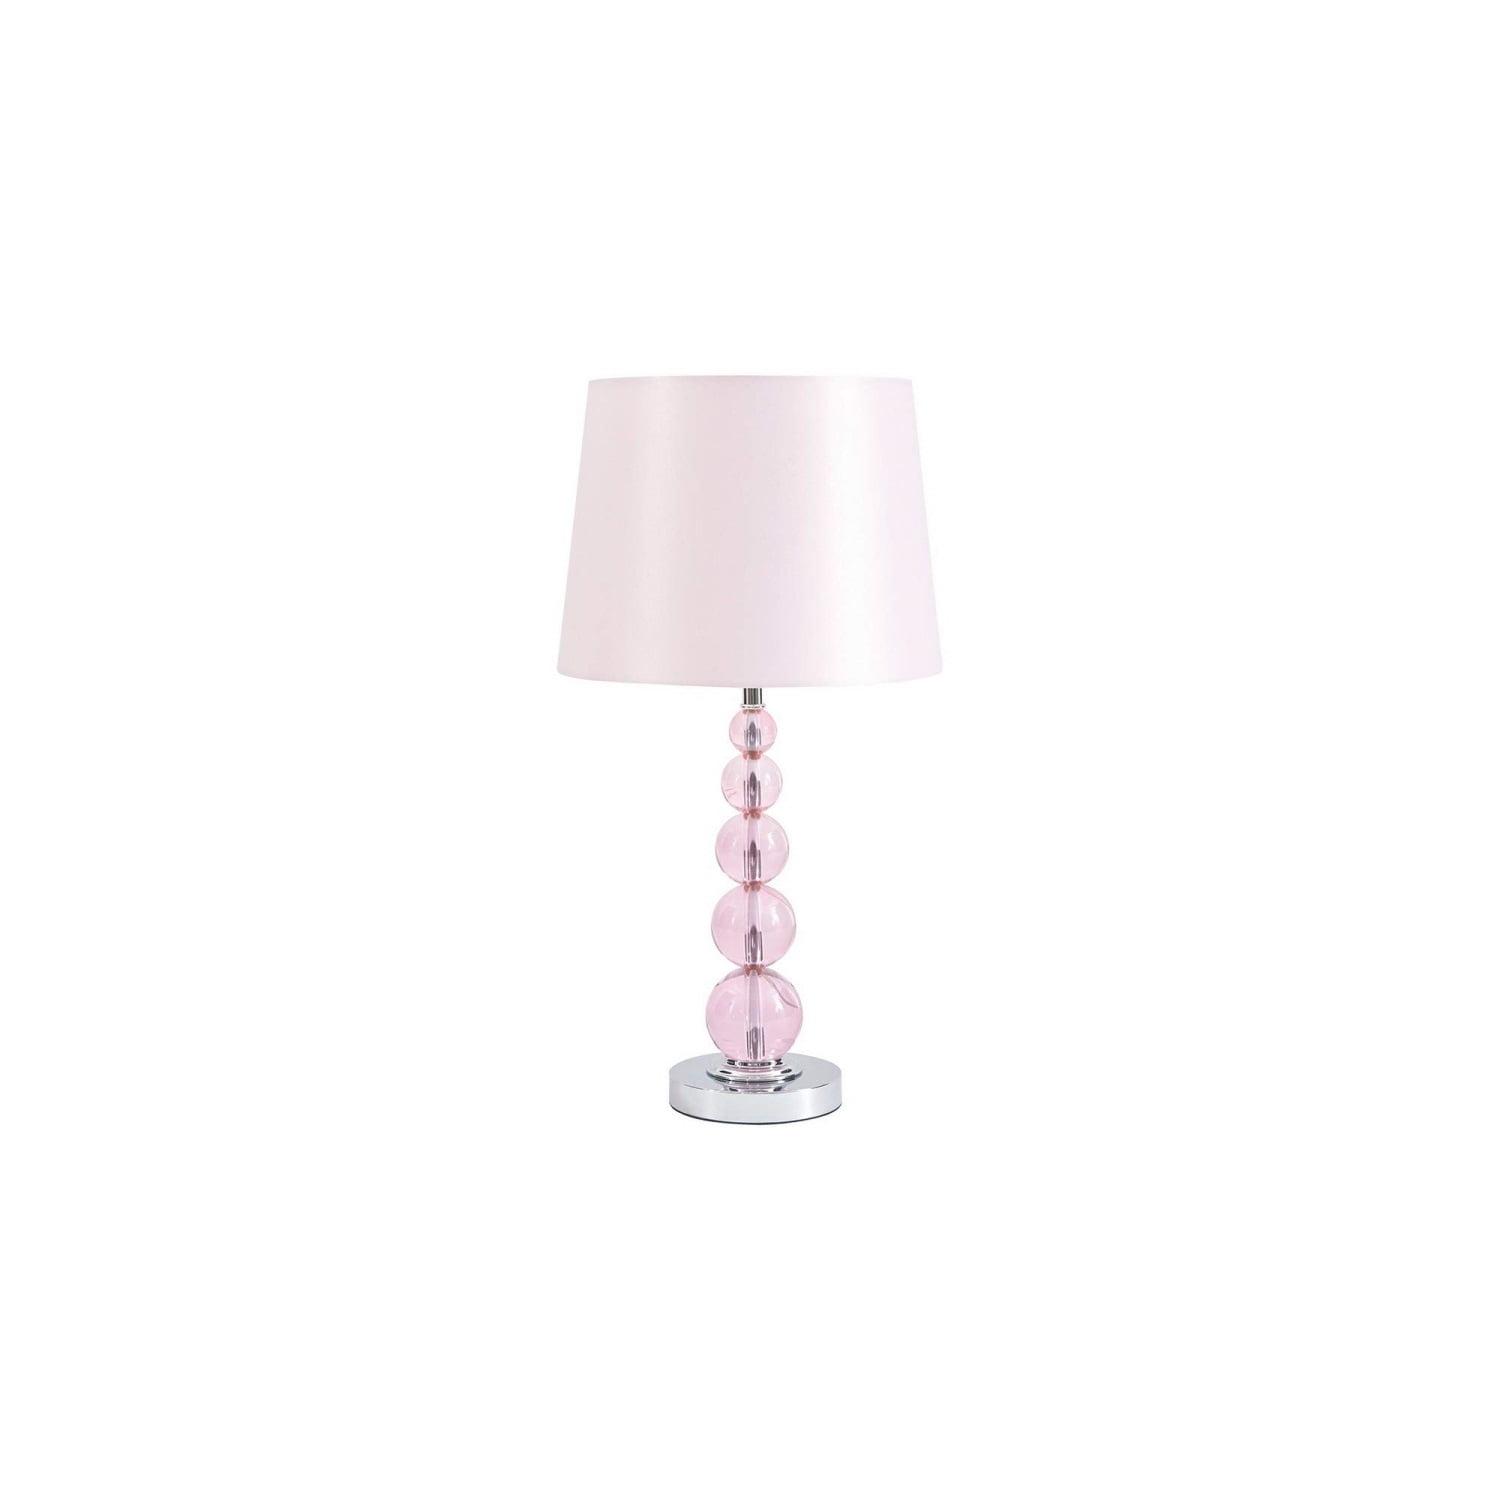 Vintage Pink Crystal-Accented Metal Table Lamp, 23" Height